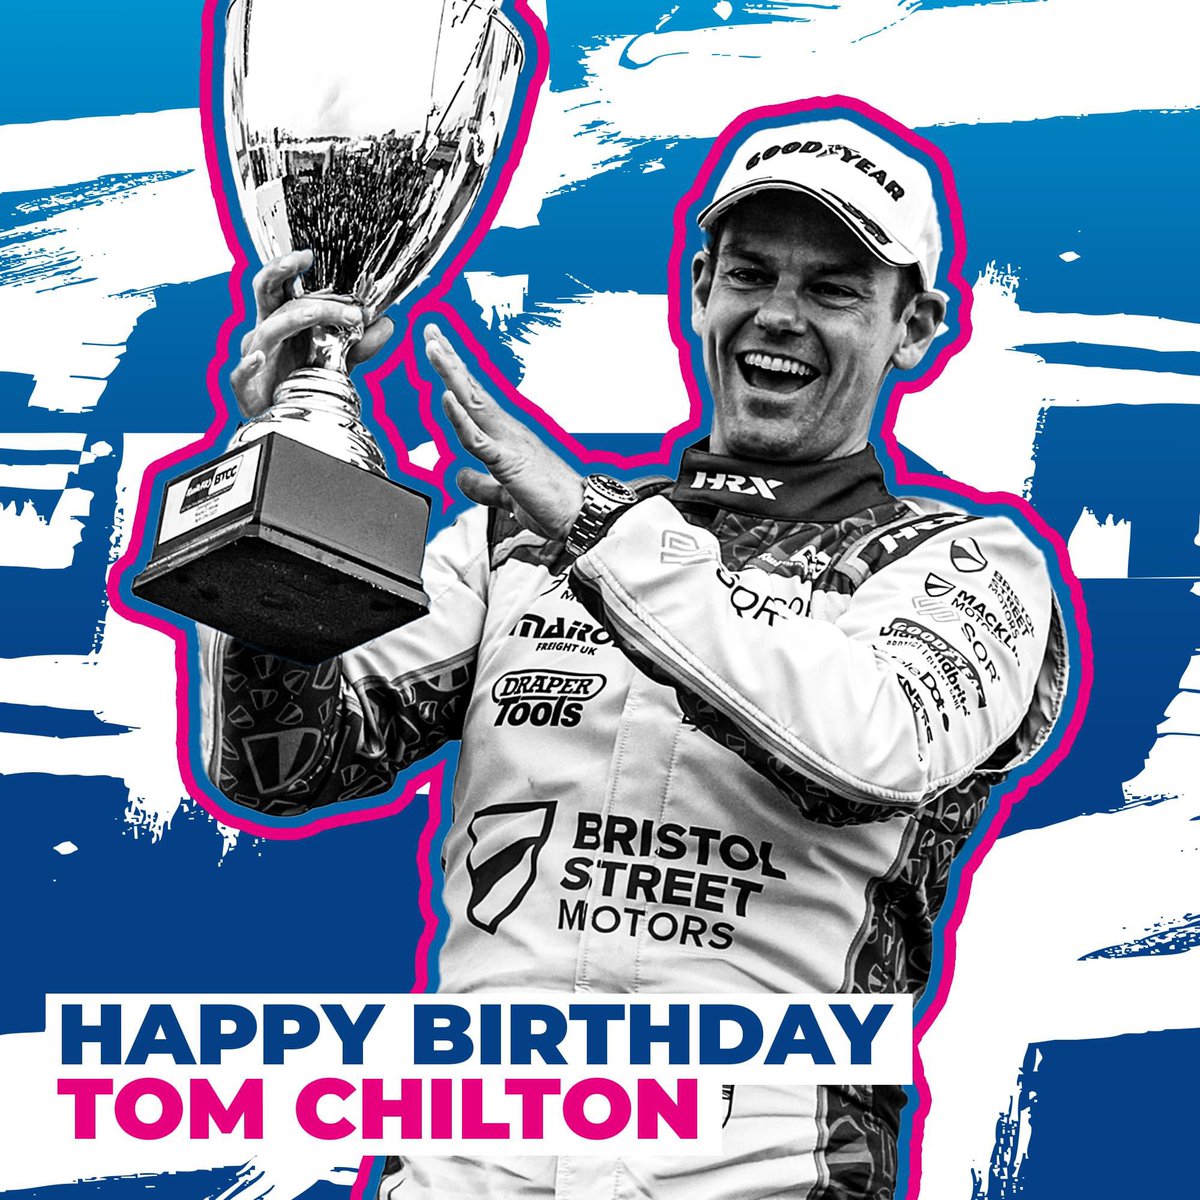 Happy Birthday, Tom Chilton! 🎉 What better way to celebrate than with the launch of your 2024 livery! Wishing you an amazing year ahead filled with success, joy, and more podiums! 🏁🏆 #EXCELR8Motorsport #HappyBirthday #BristolStreetMotors #TomChilton